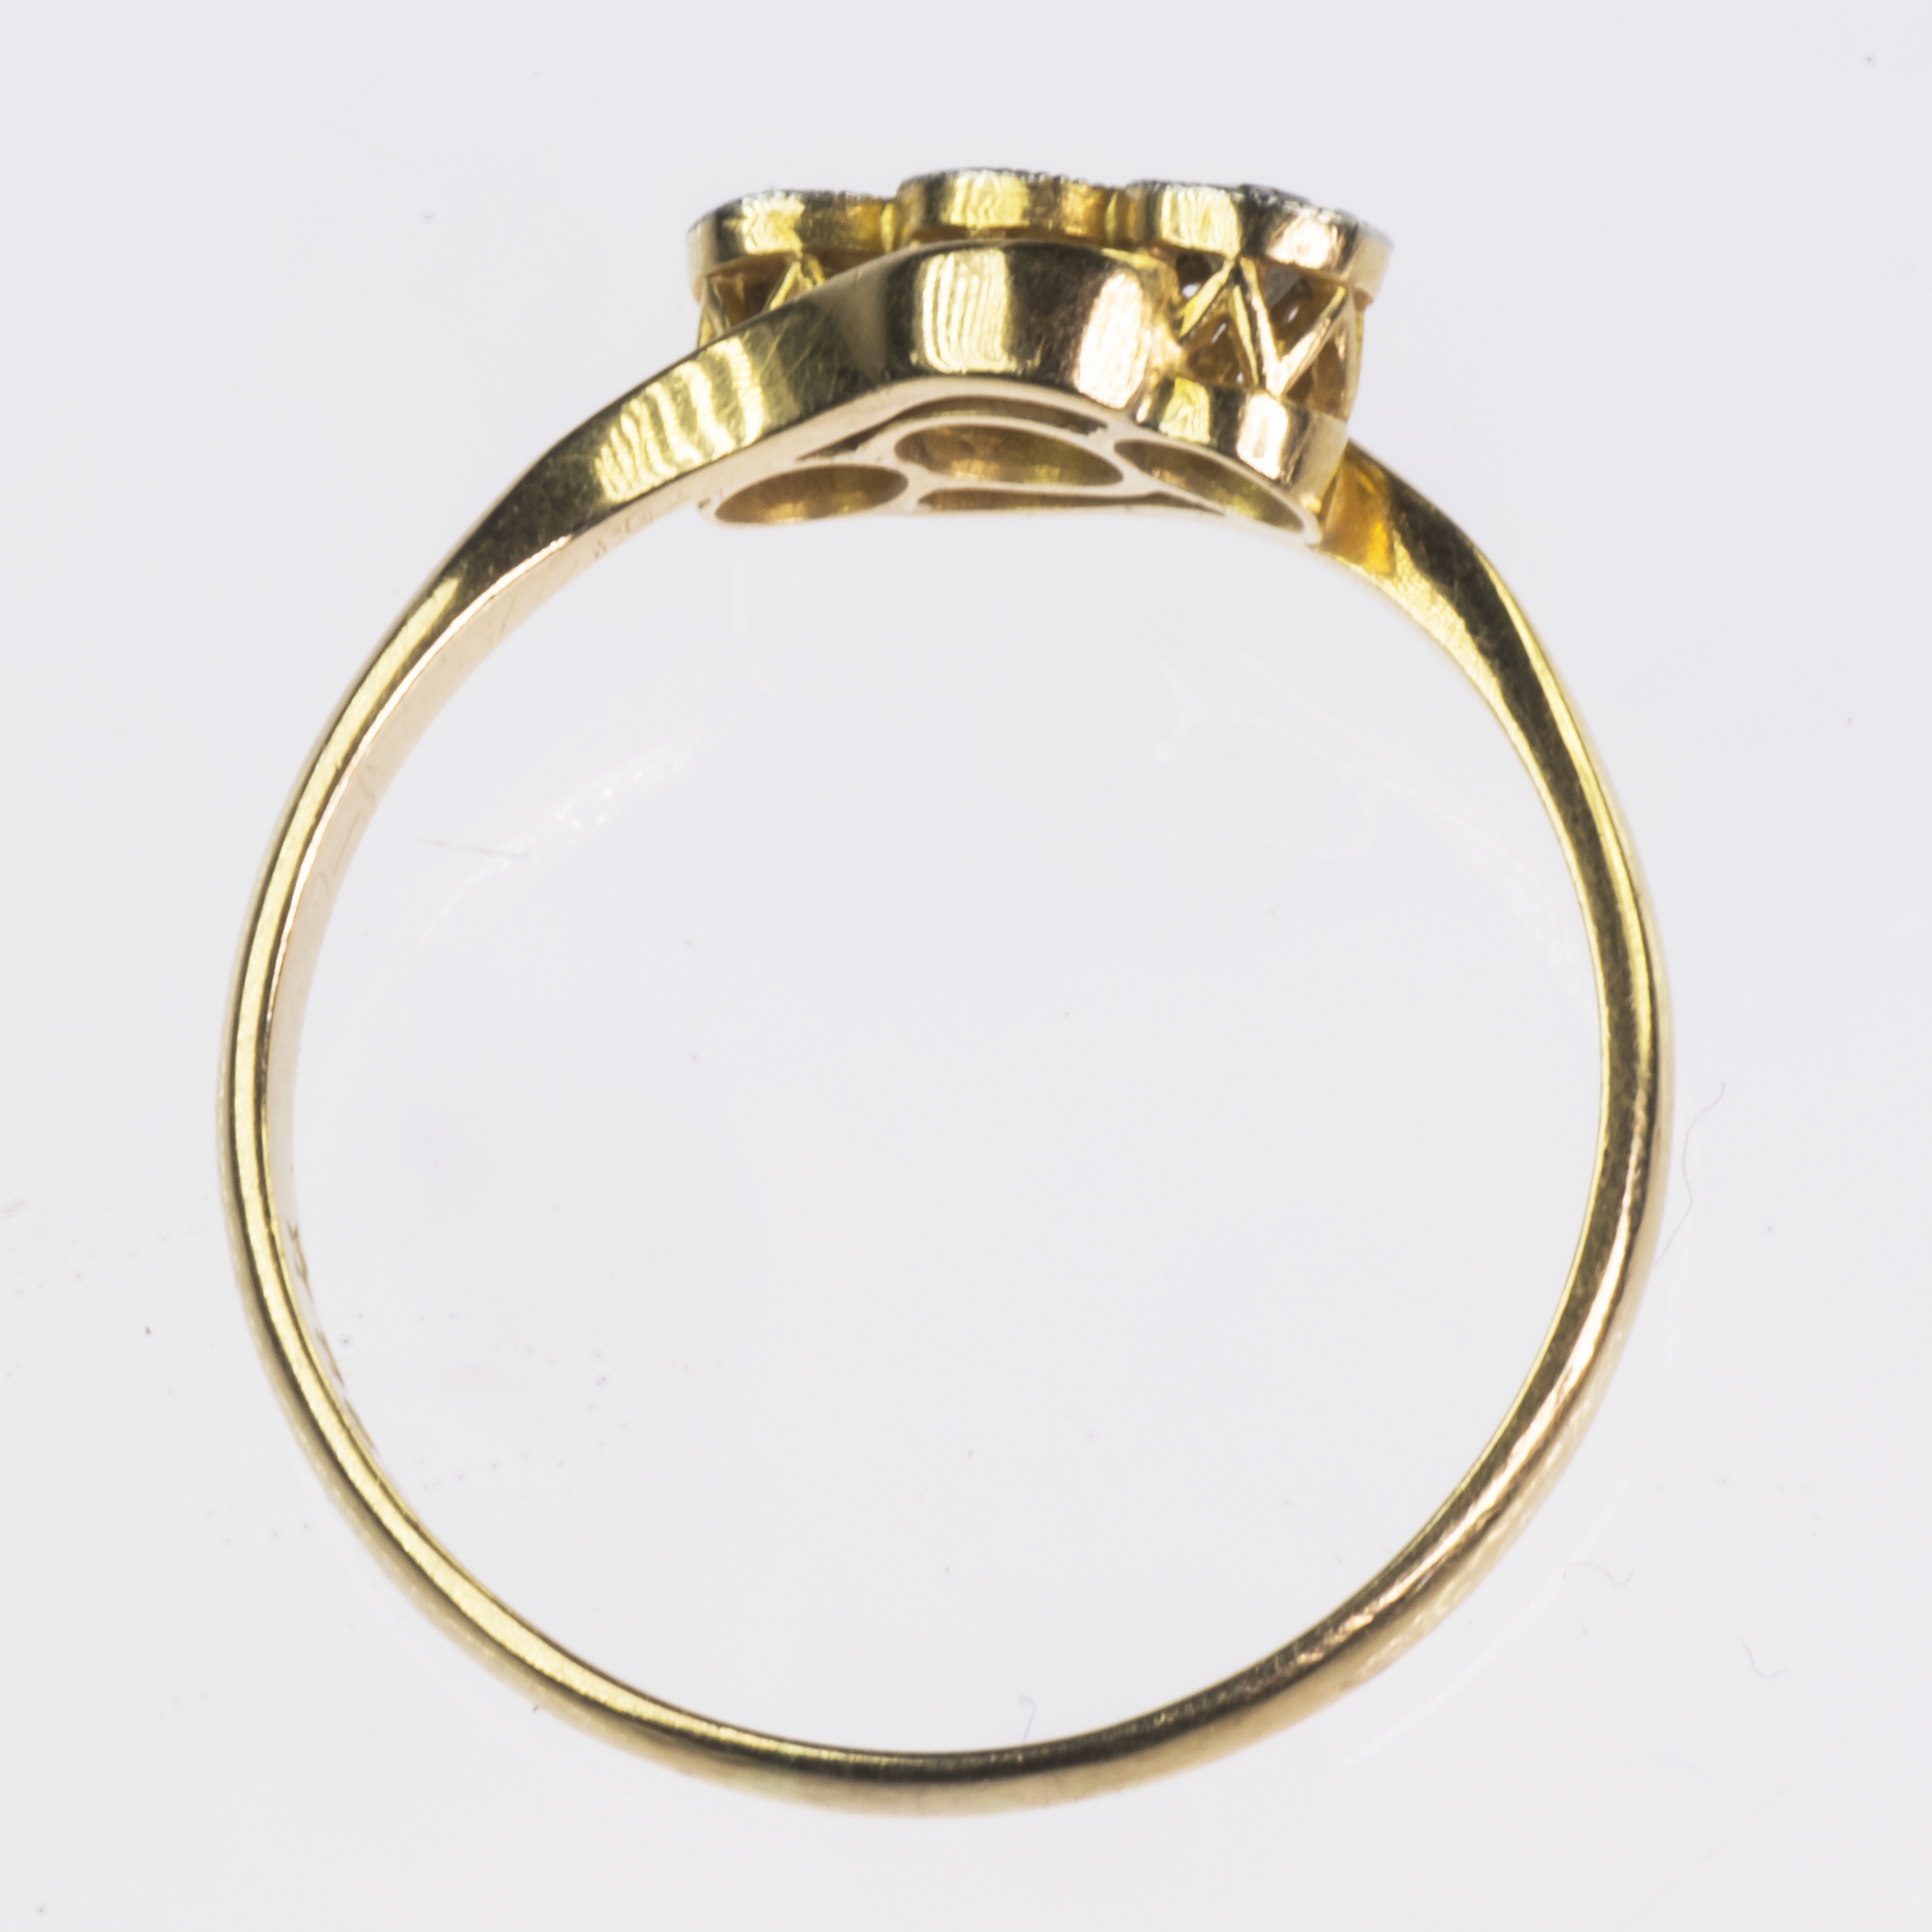 AN 18CT YELLOW GOLD AND PLATINUM DIAMOND SET CROSSOVER RING - Image 2 of 3